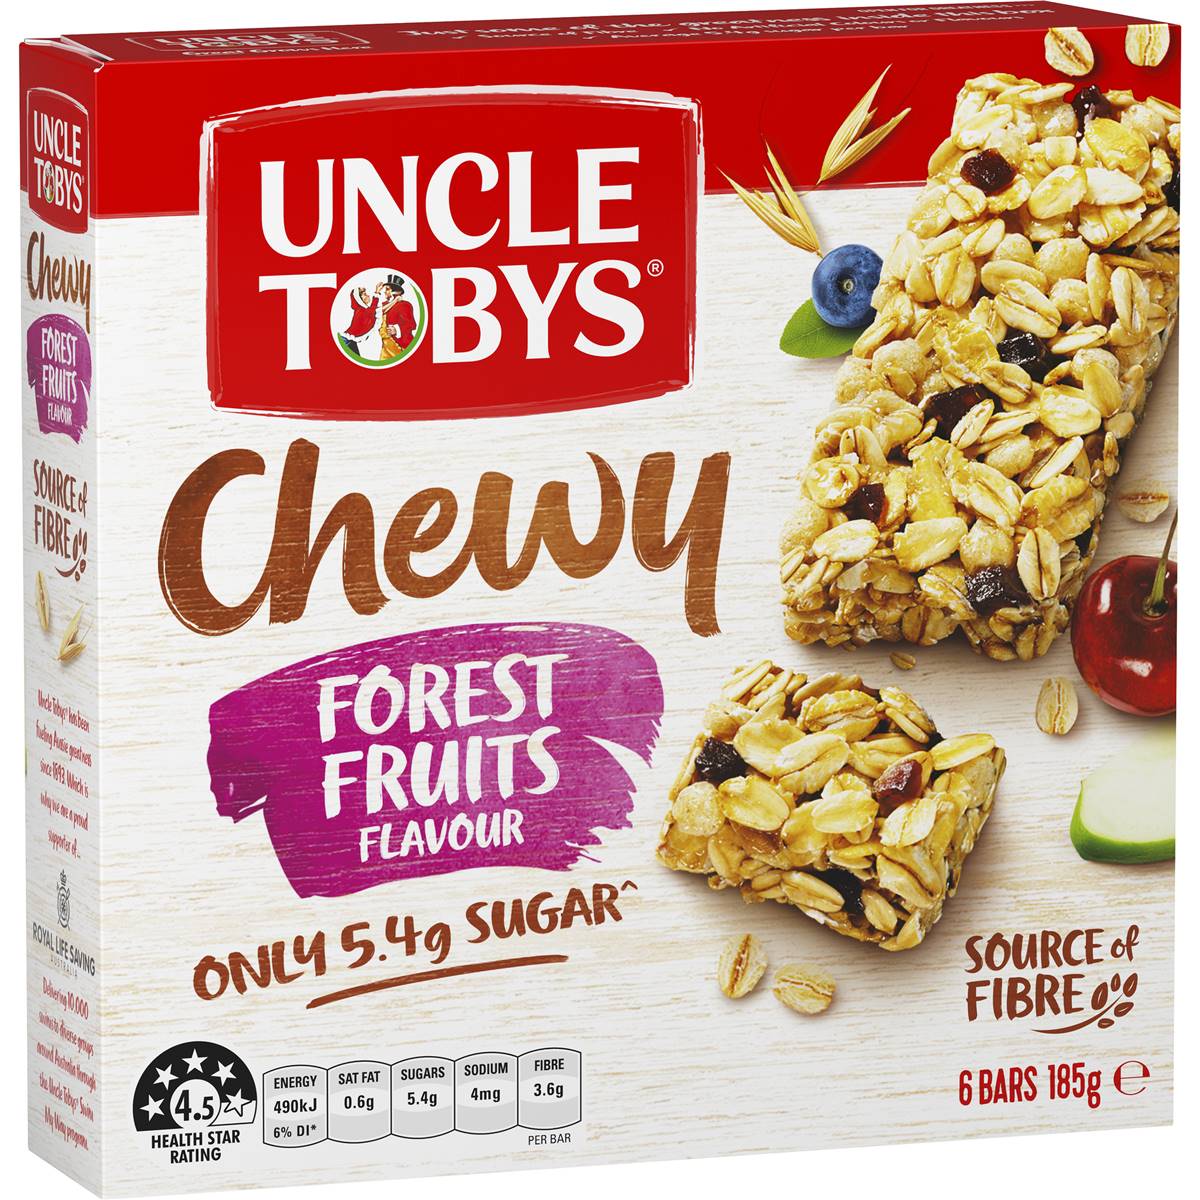 Calories in Uncle Tobys Muesli Bars Chewy Forest Fruits